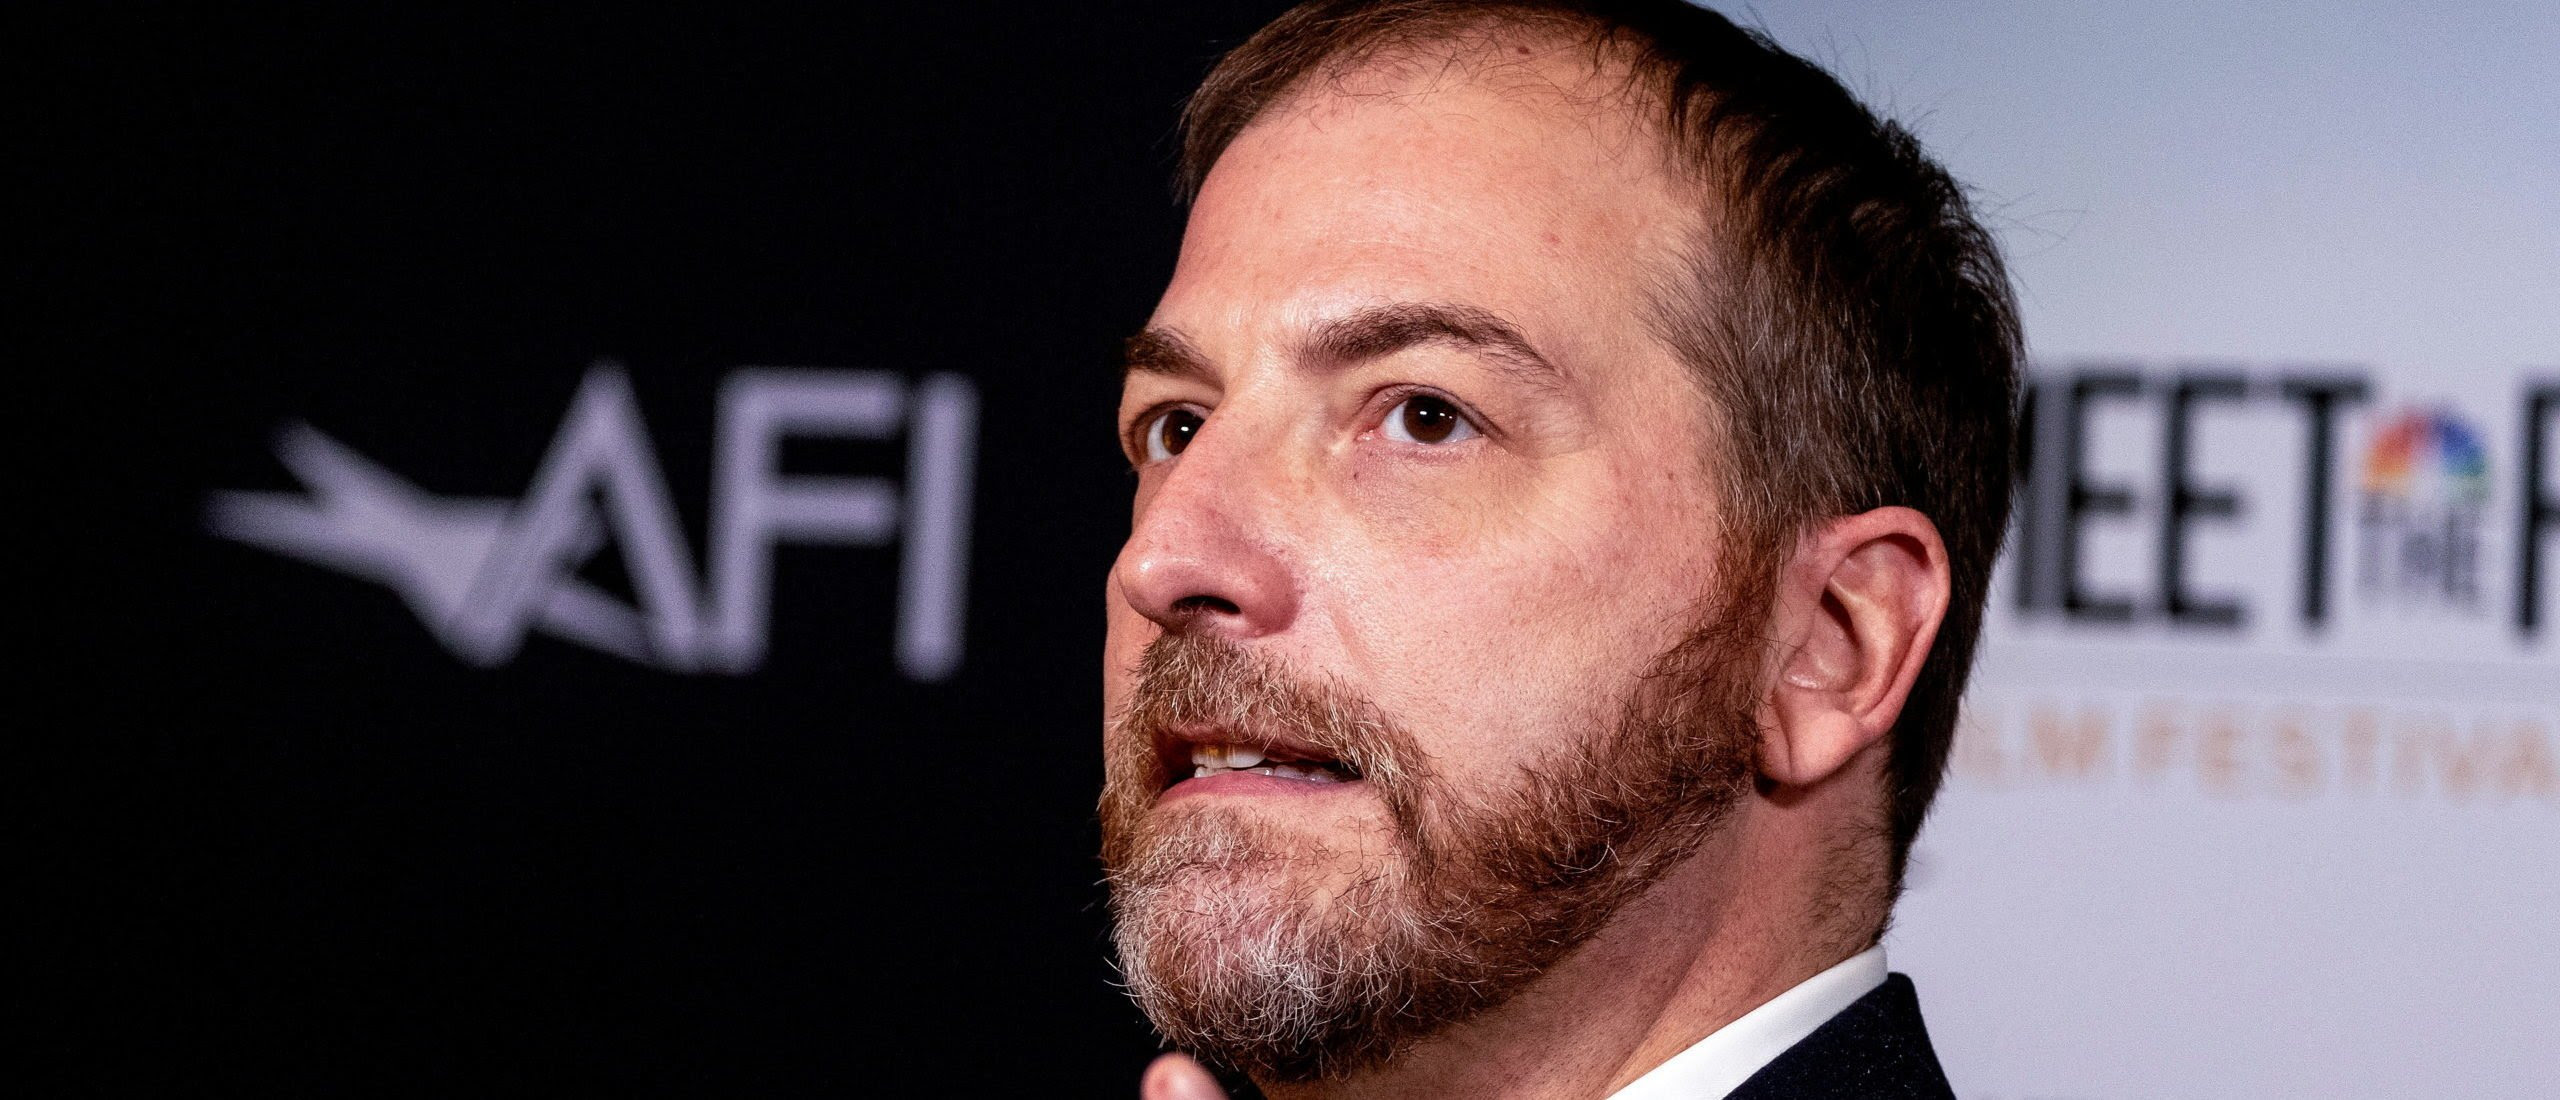 MSNBC Removes Host Chuck Todd’s ‘Meet The Press Daily’ From Cable Lineup